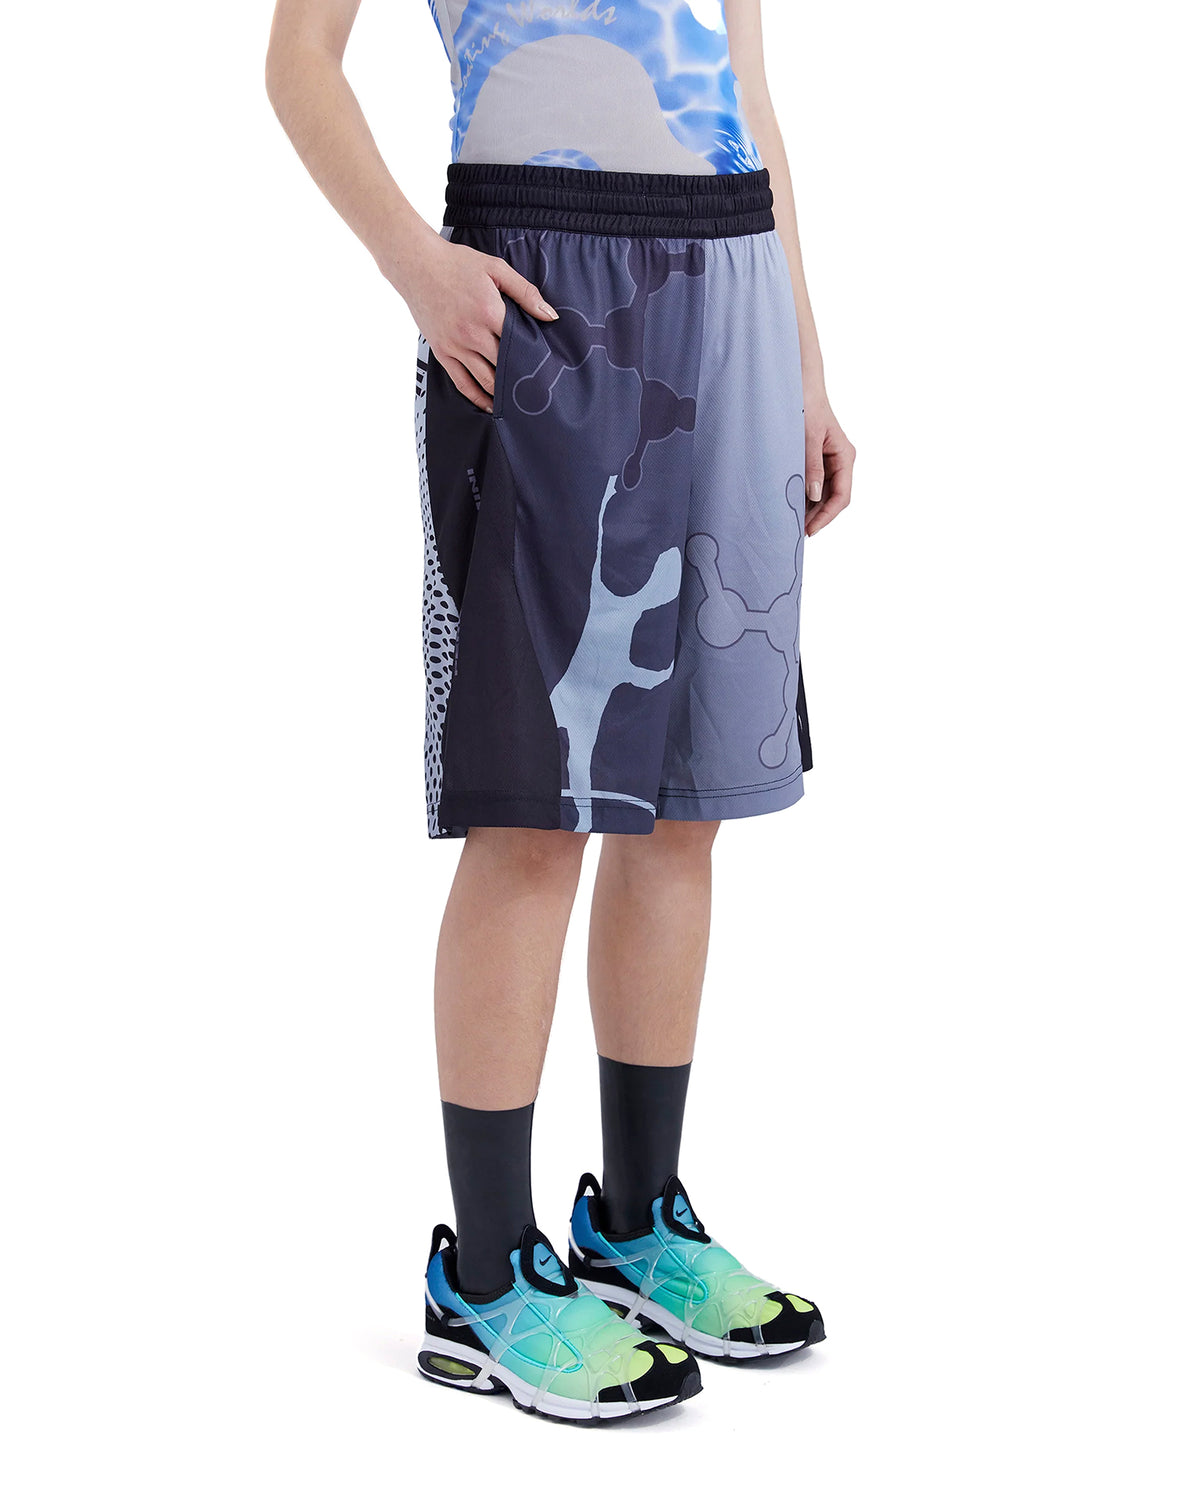 Perks and Mini (P.A.M.) | Sublimated Mesh Shorts Grey - Concrete